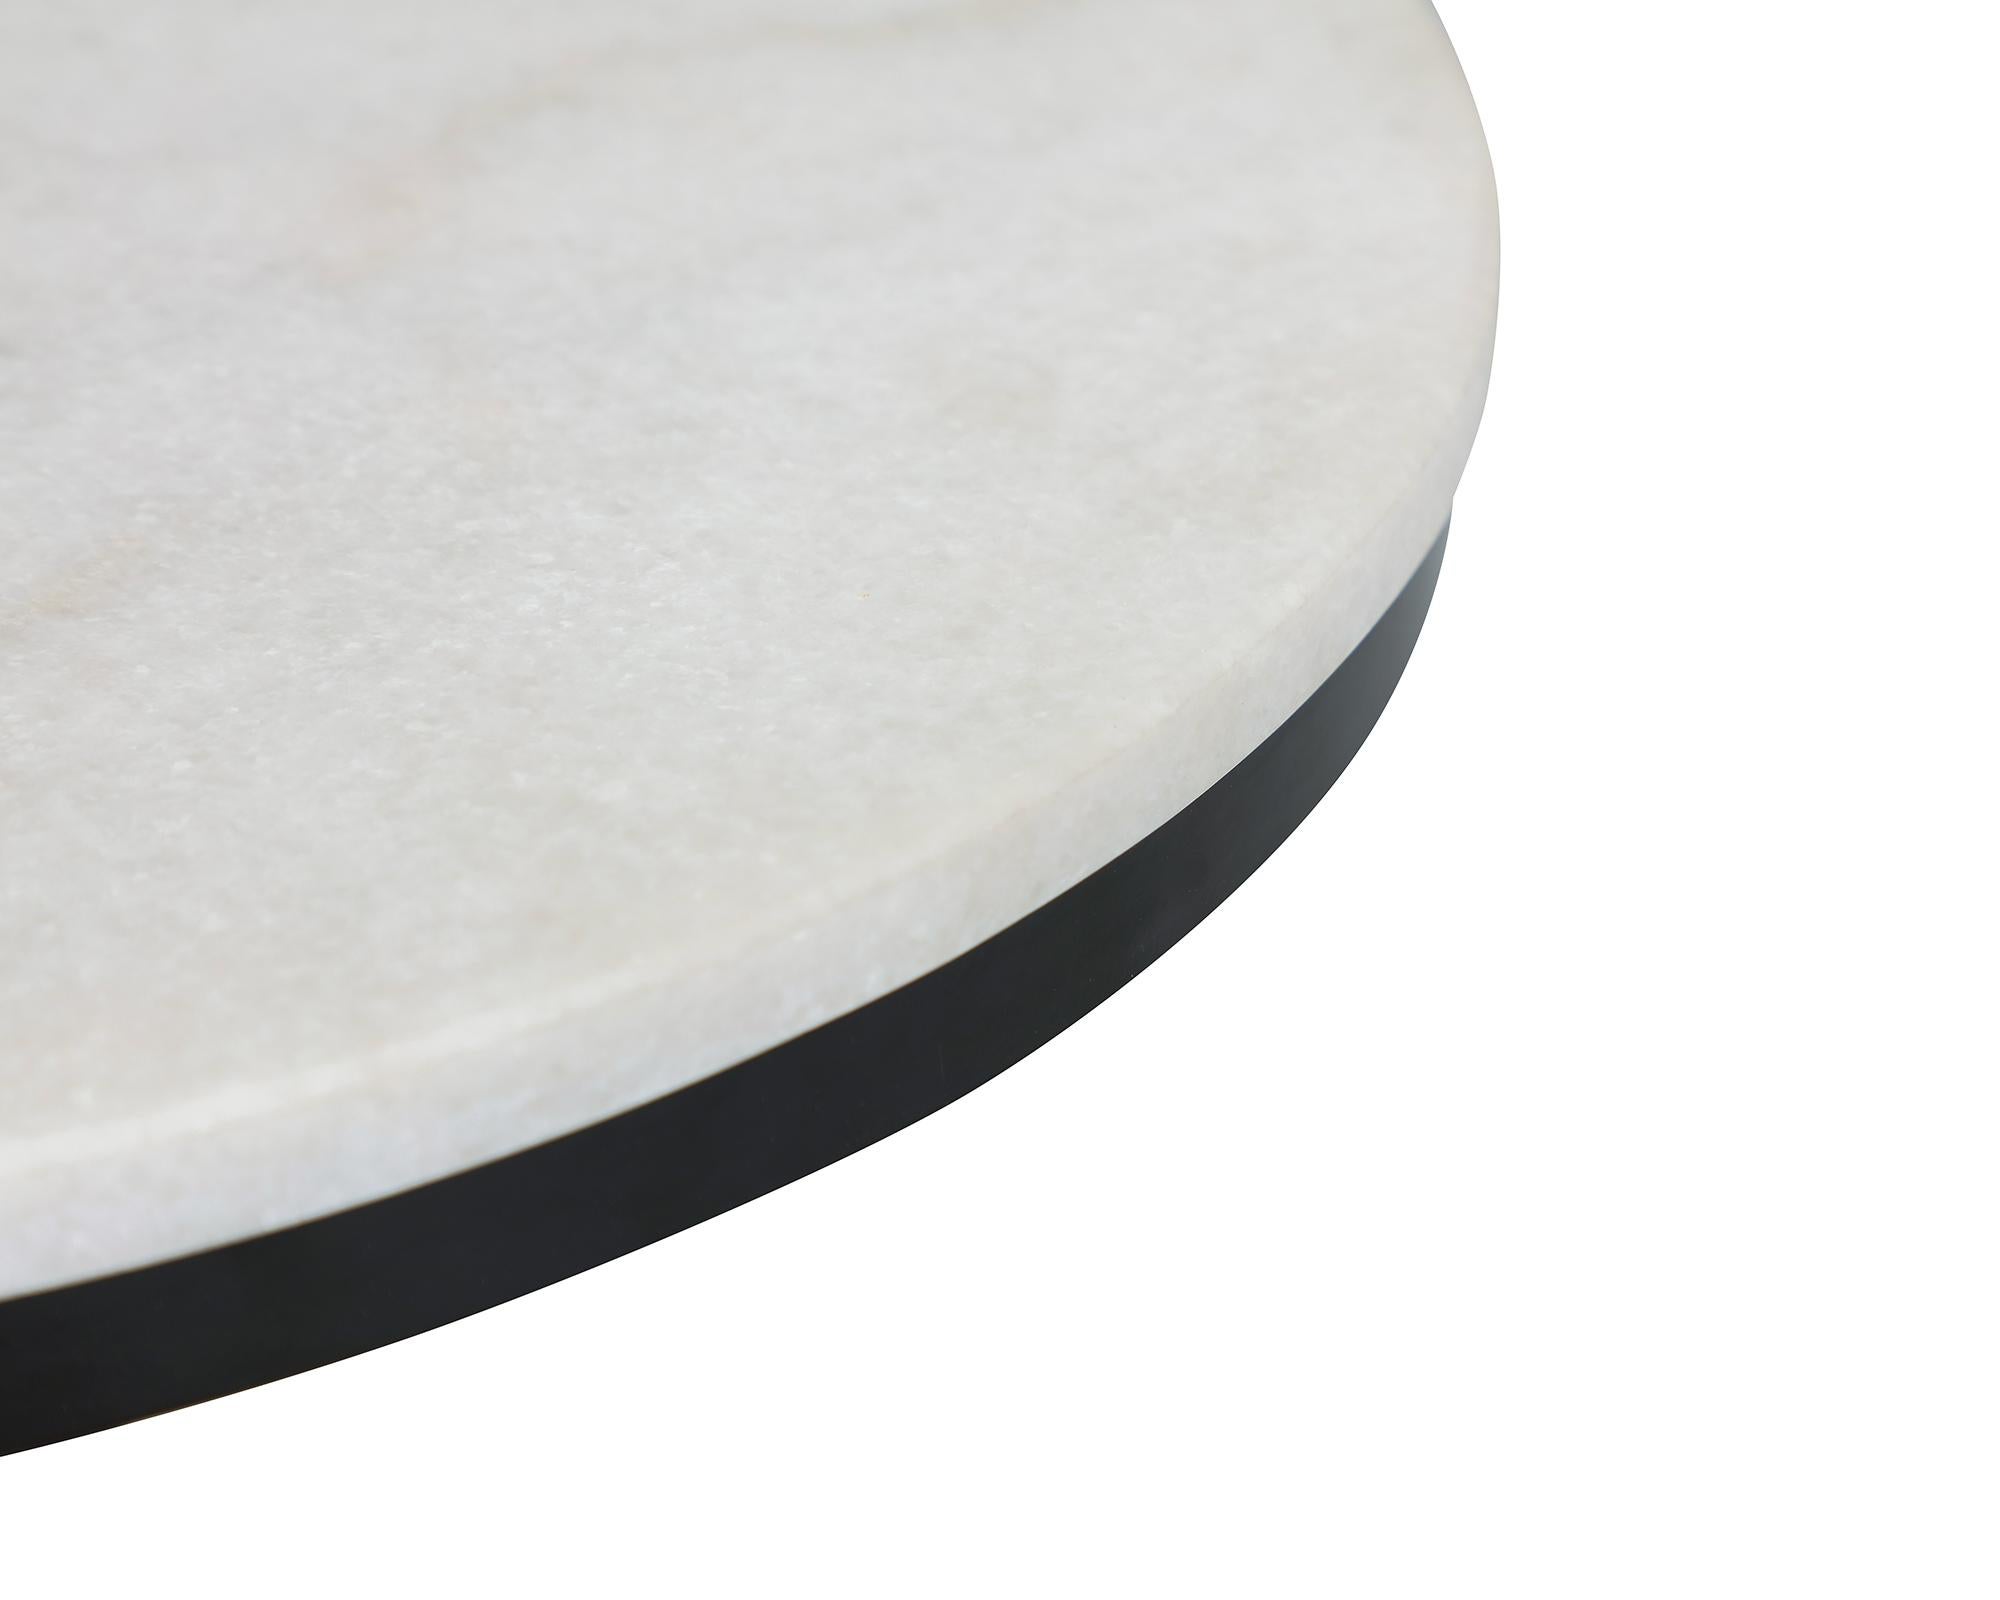 White marble and brass coffee table

Materials: White marble top, black high gloss metal base with gold metal cups
Dimensions: D 50 x H 55 cm.